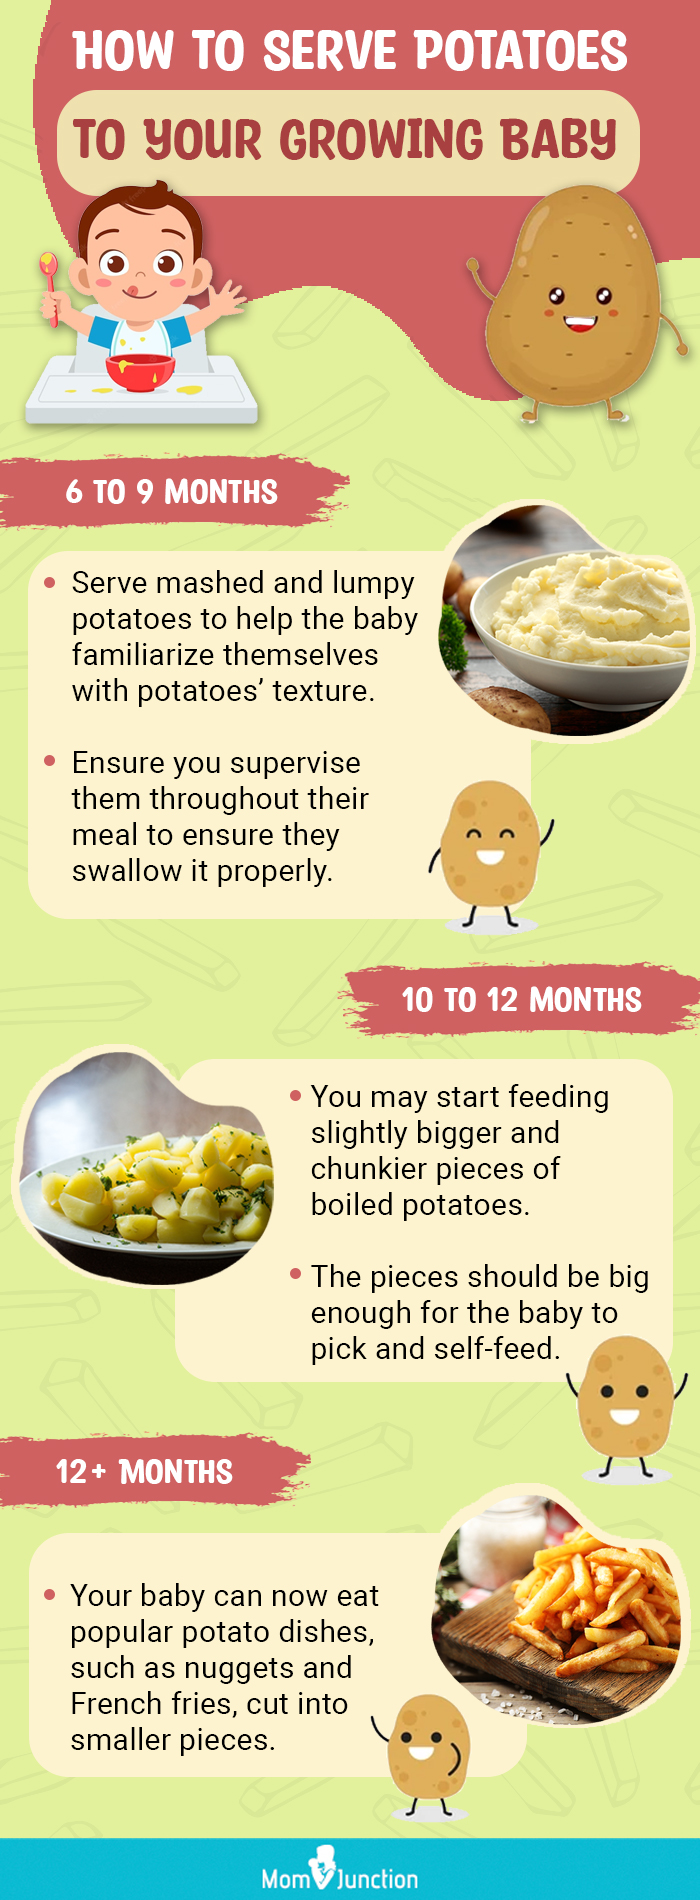 age wise potato serving tips for babies (infographic)